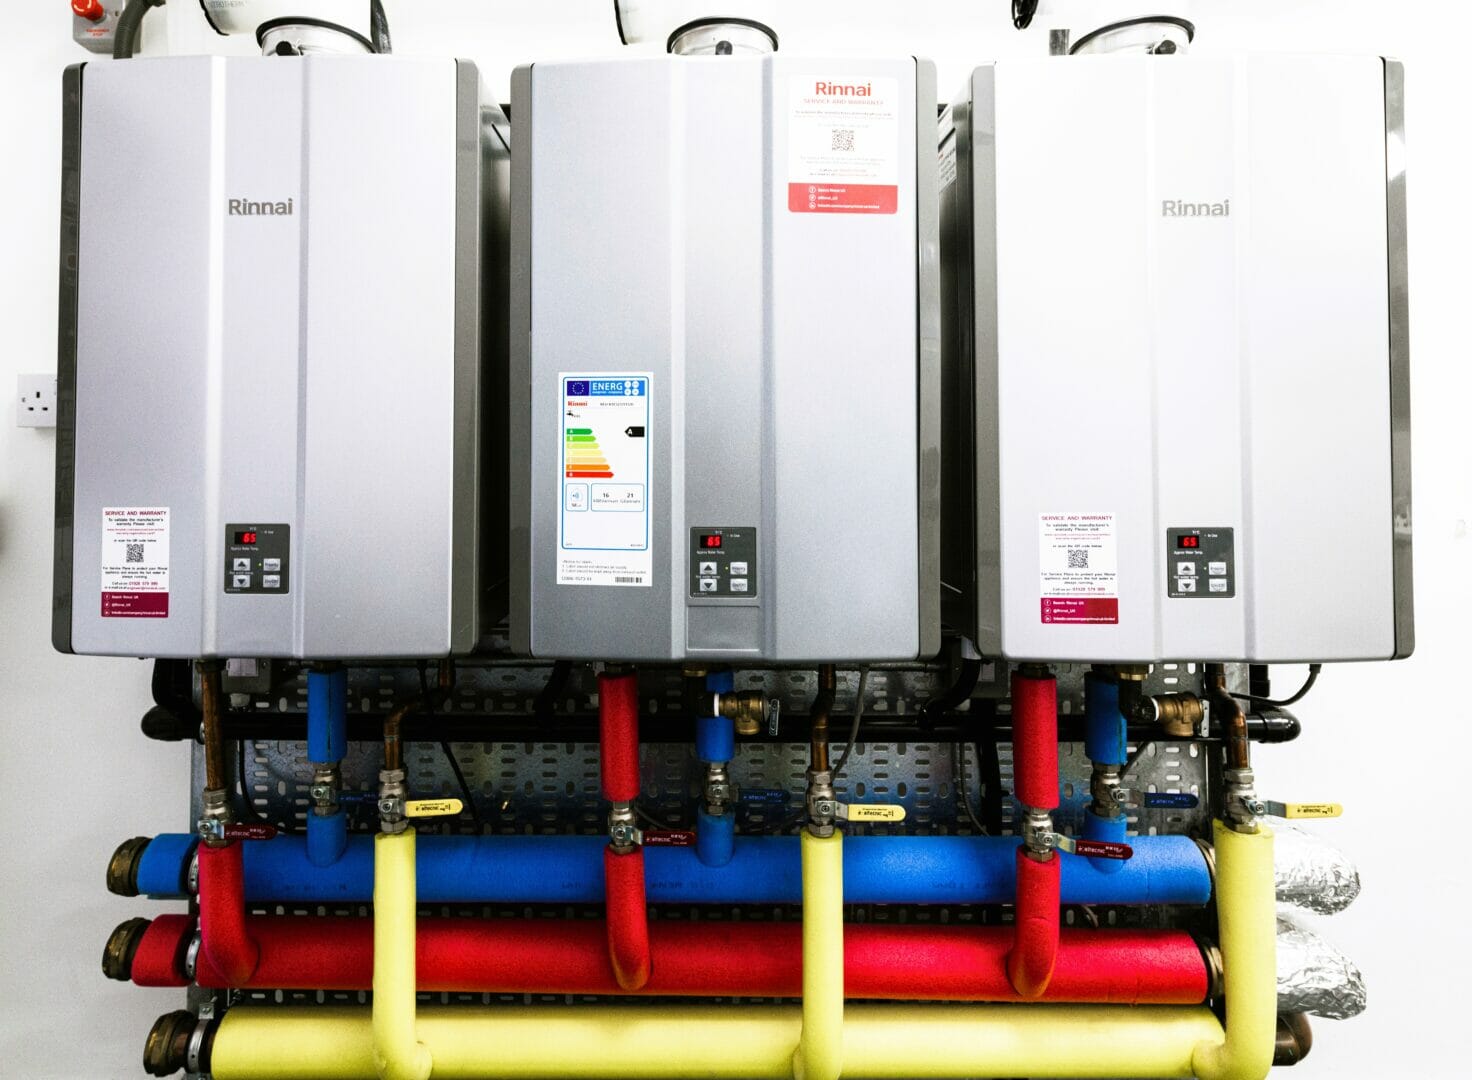 RETRO-FIT PROJECT FUTUREPROOFS BY REPLACING TRADITIONAL STORAGE WITH HYDROGEN BLENDS READY CONTINUOUS FLOW WATER HEATERS #Engineering #New #SystemYields @rinnai_uk